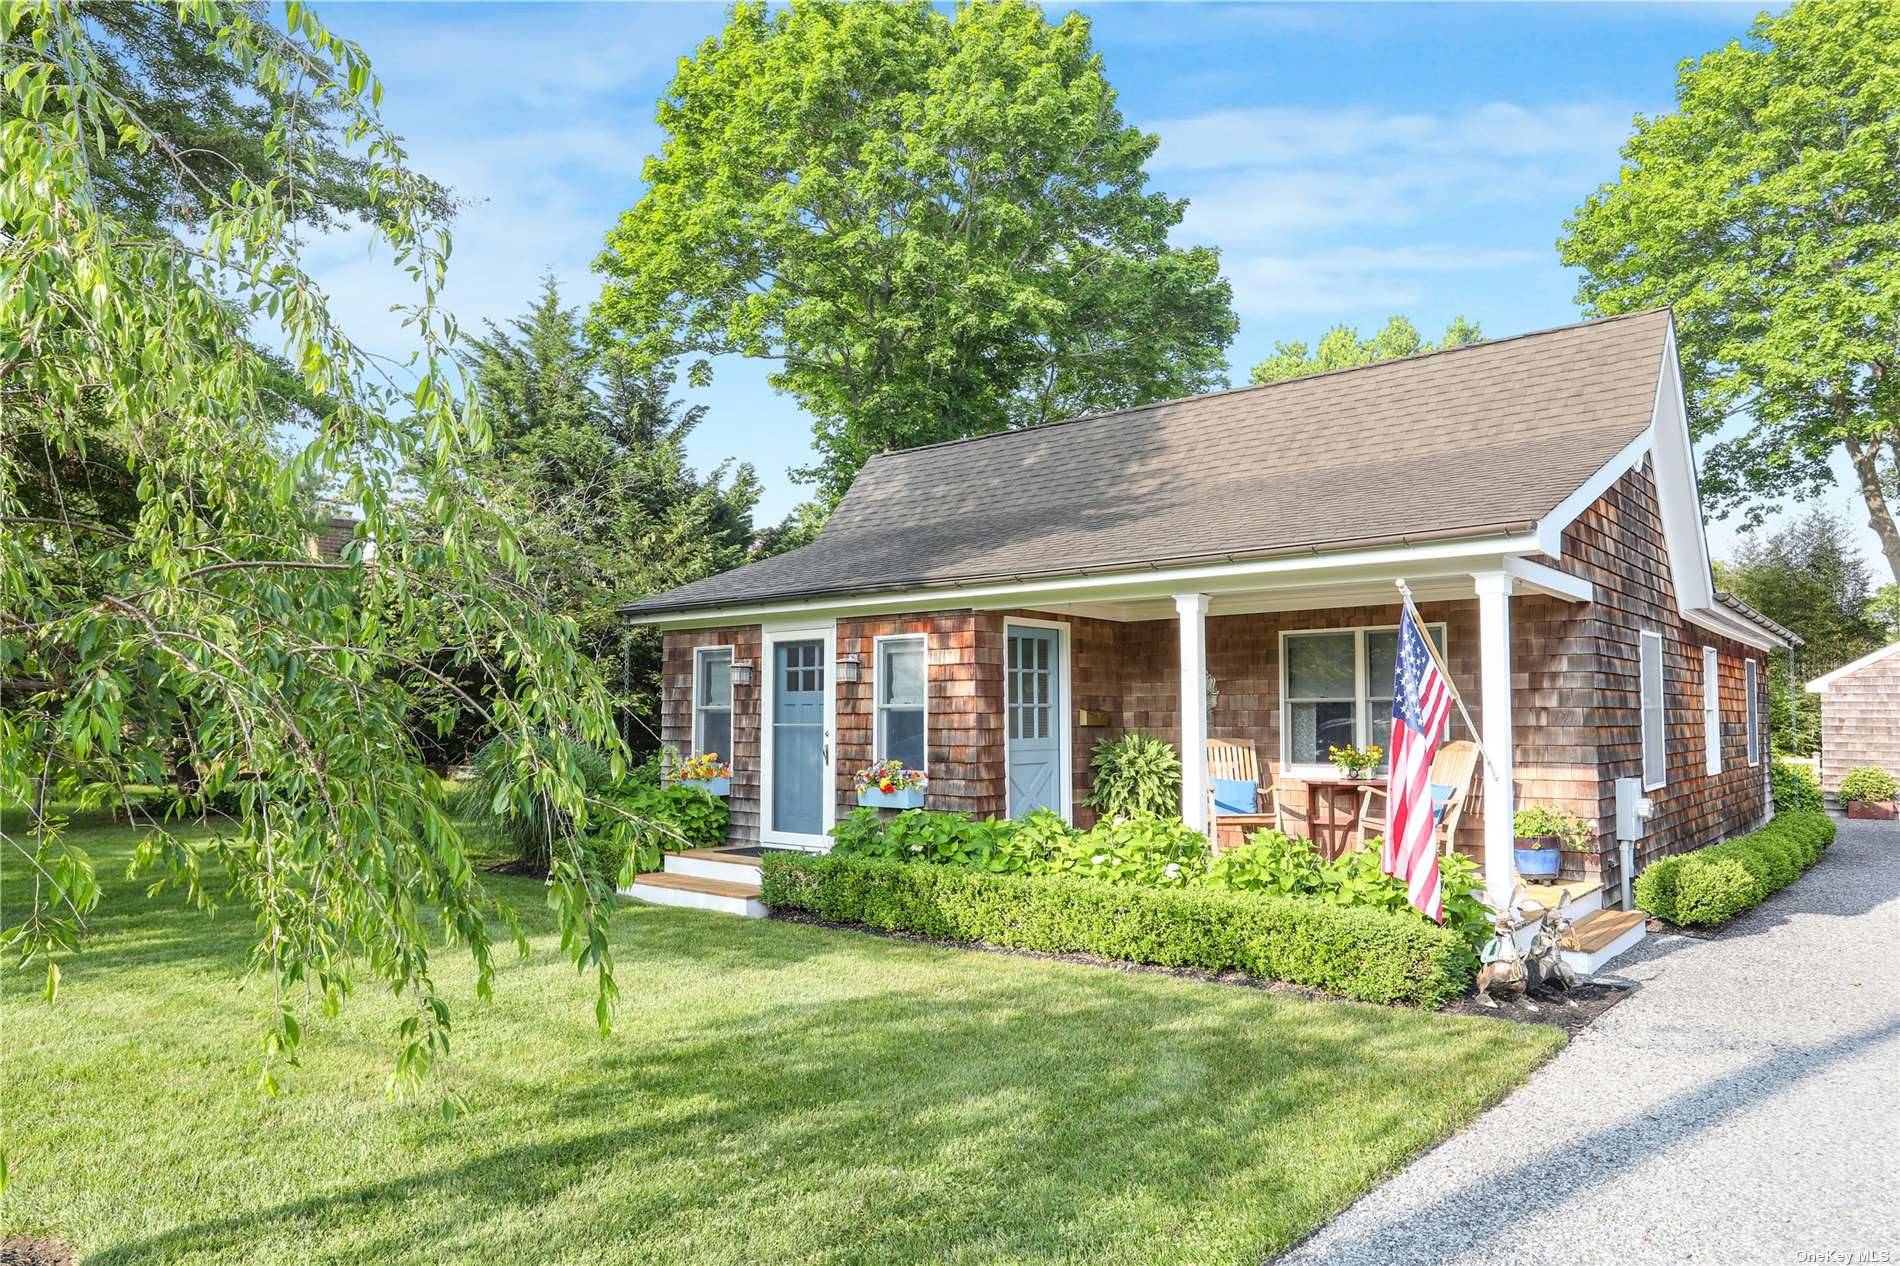 Welcome to this gorgeous cottage in the heart of Bellport Village.